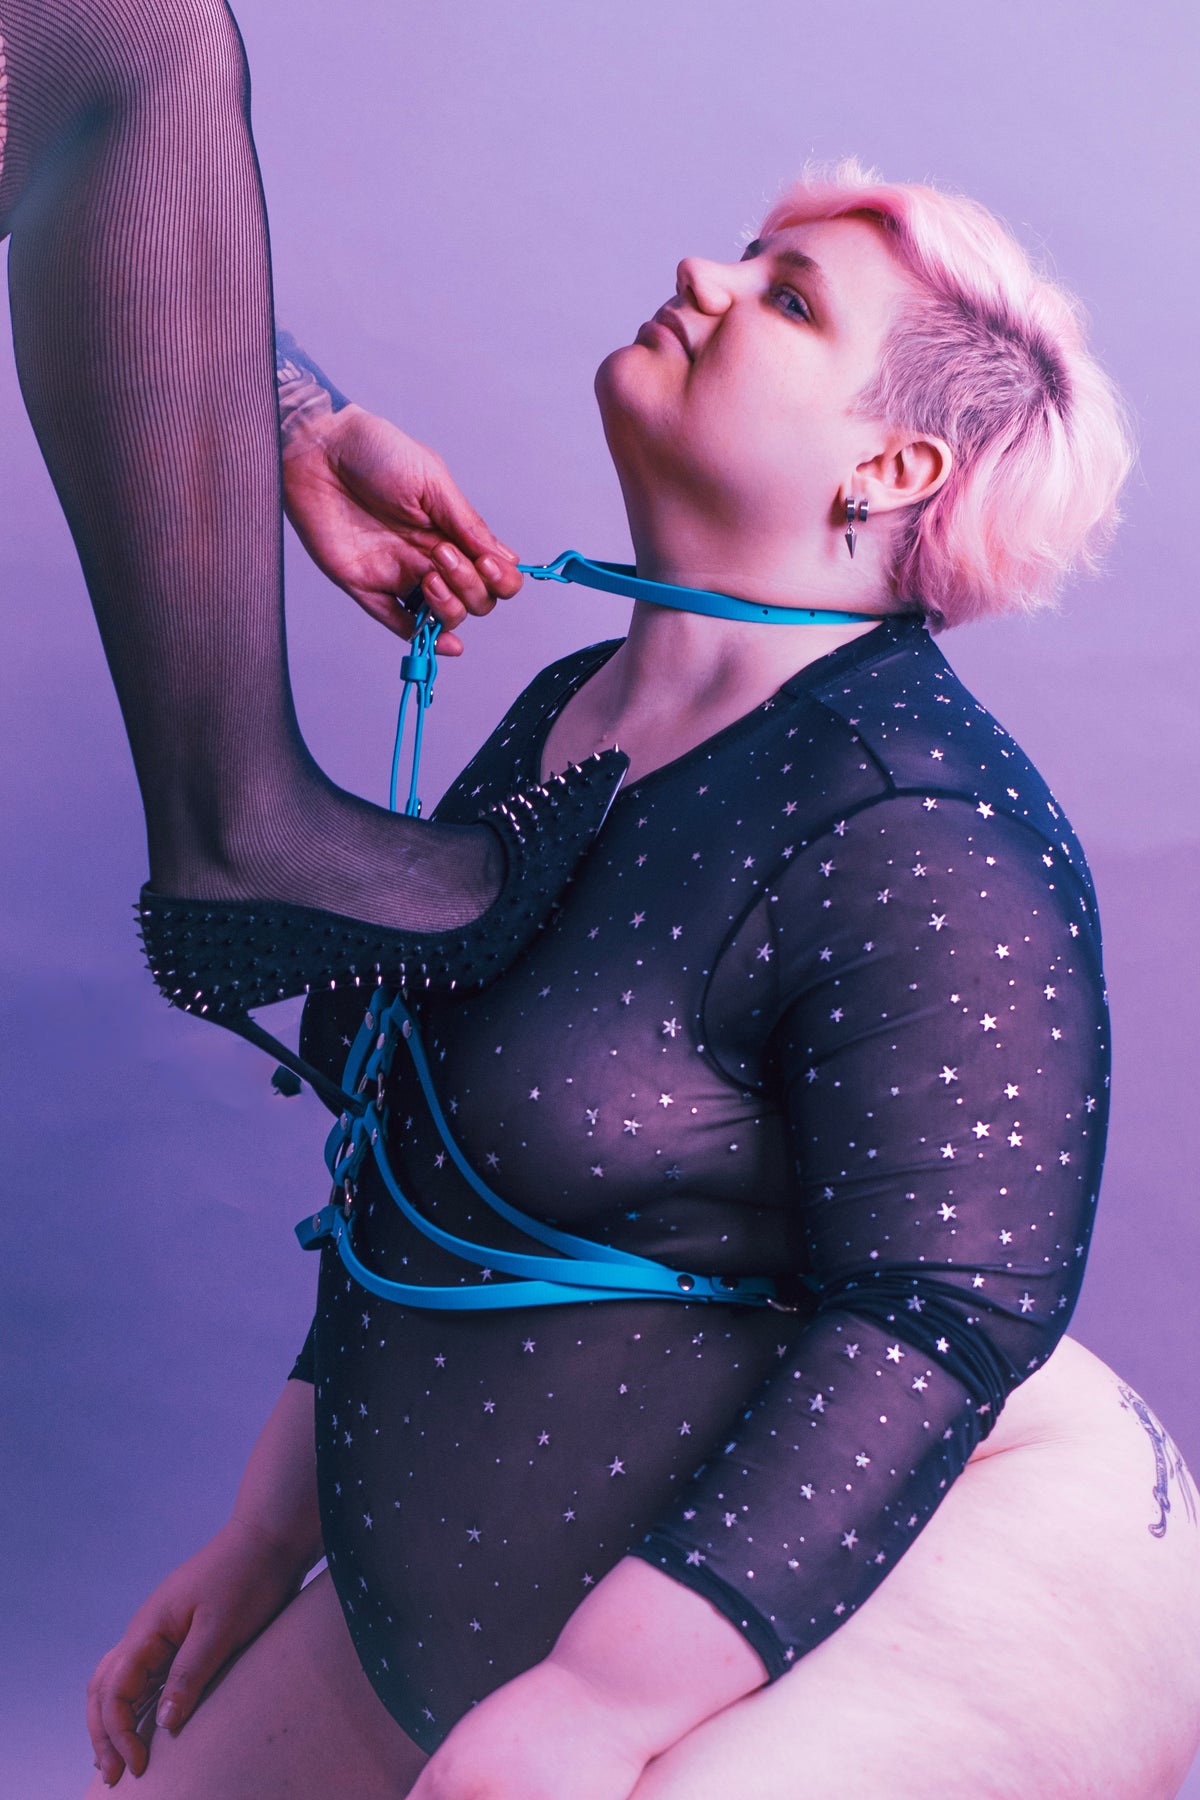 Woman kneeling while wearing a turquoise waist cinch harness as somebody pulls her collar.